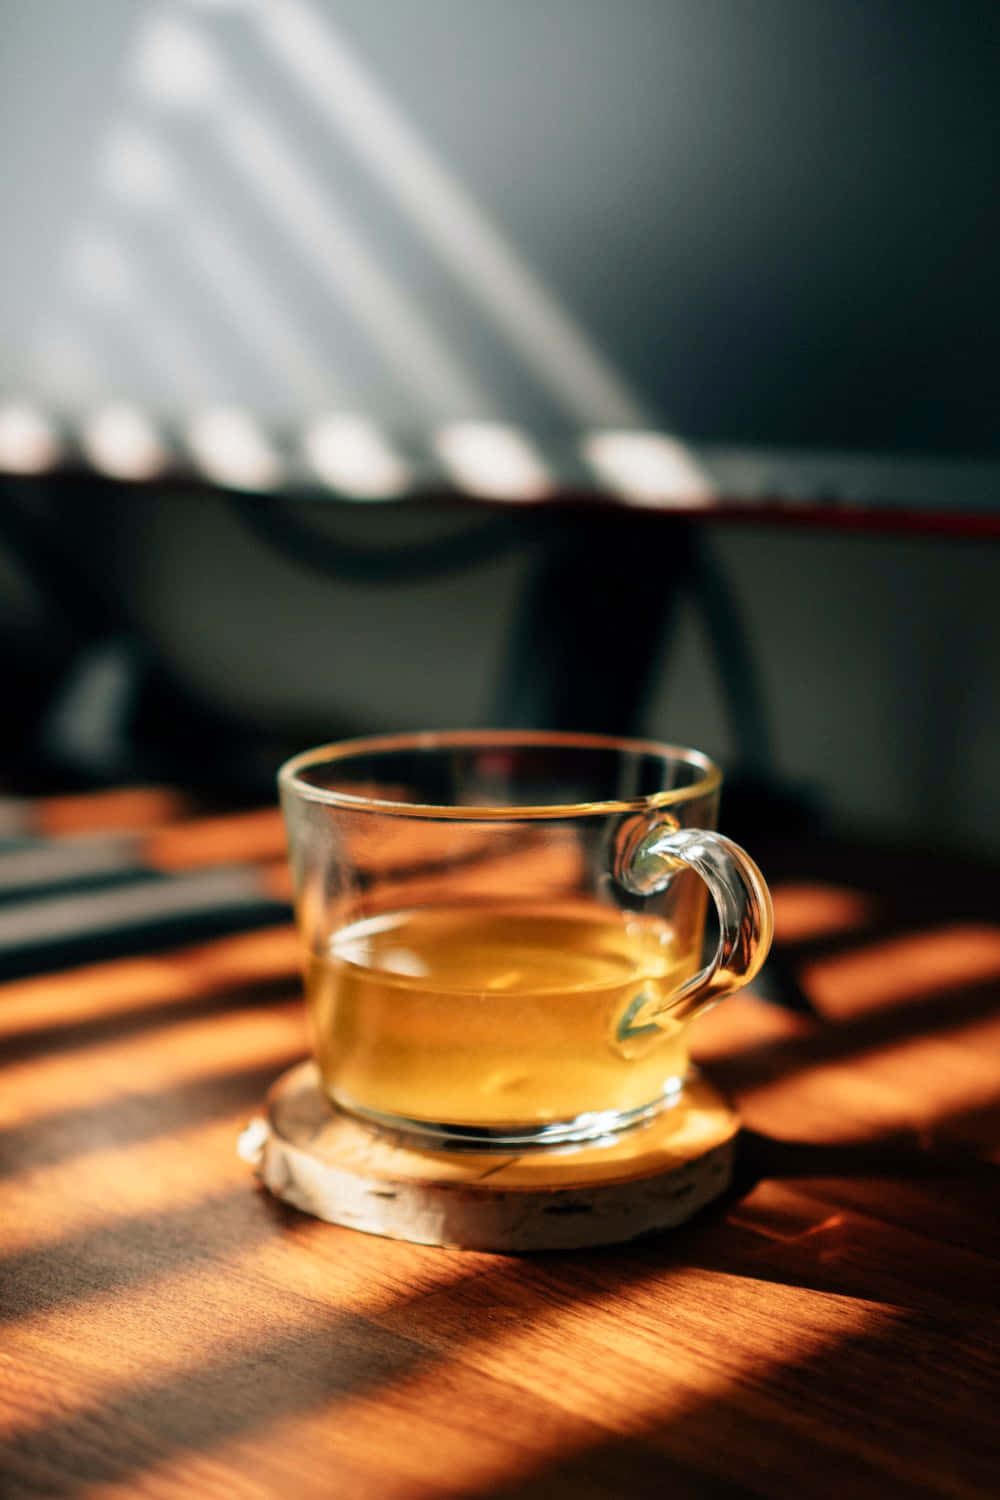 A Cup Of Tea On A Wooden Surface